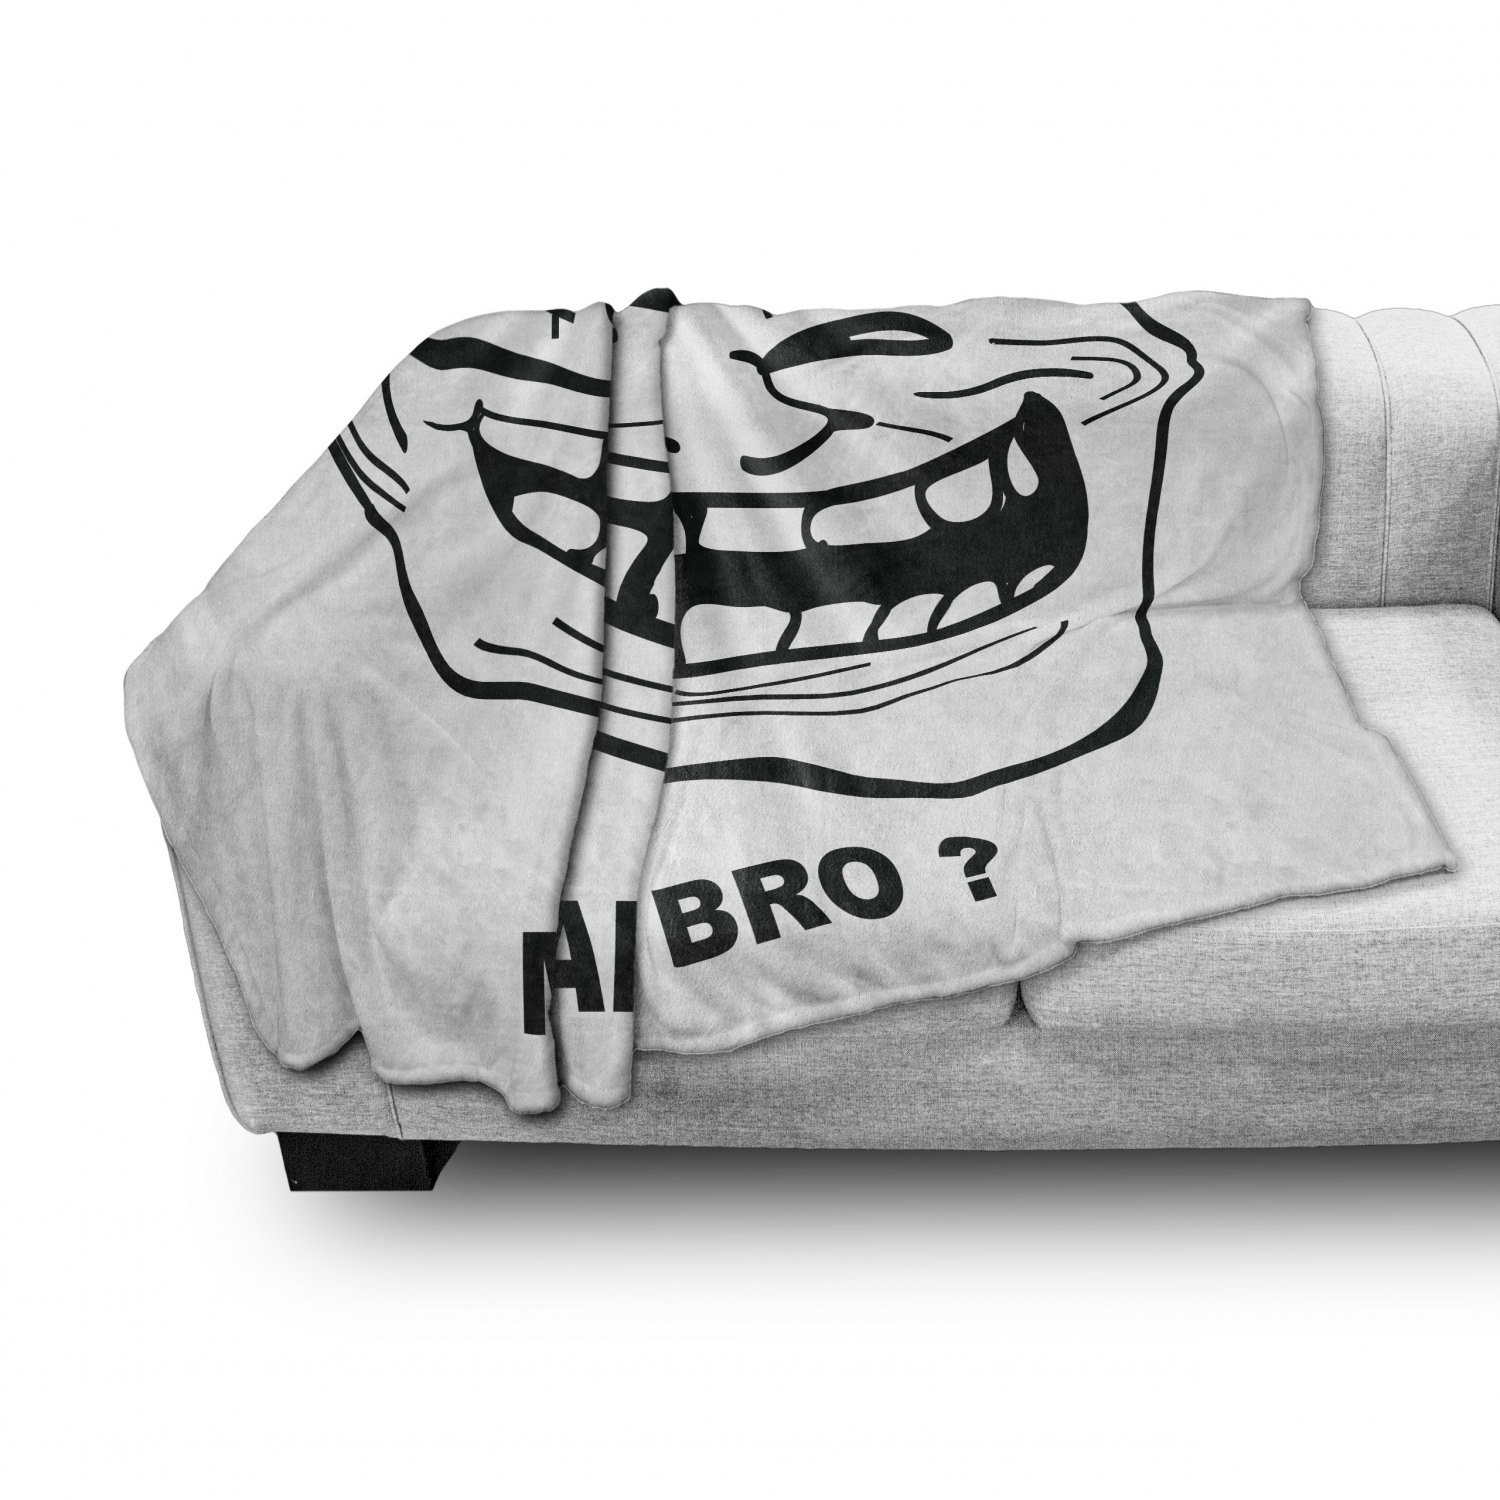 Humor Soft Flannel Fleece Throw Blanket, Cartoon Style Troll Face Guy for  Annoying Popular Internet Meme Design, Cozy Plush for Indoor and Outdoor